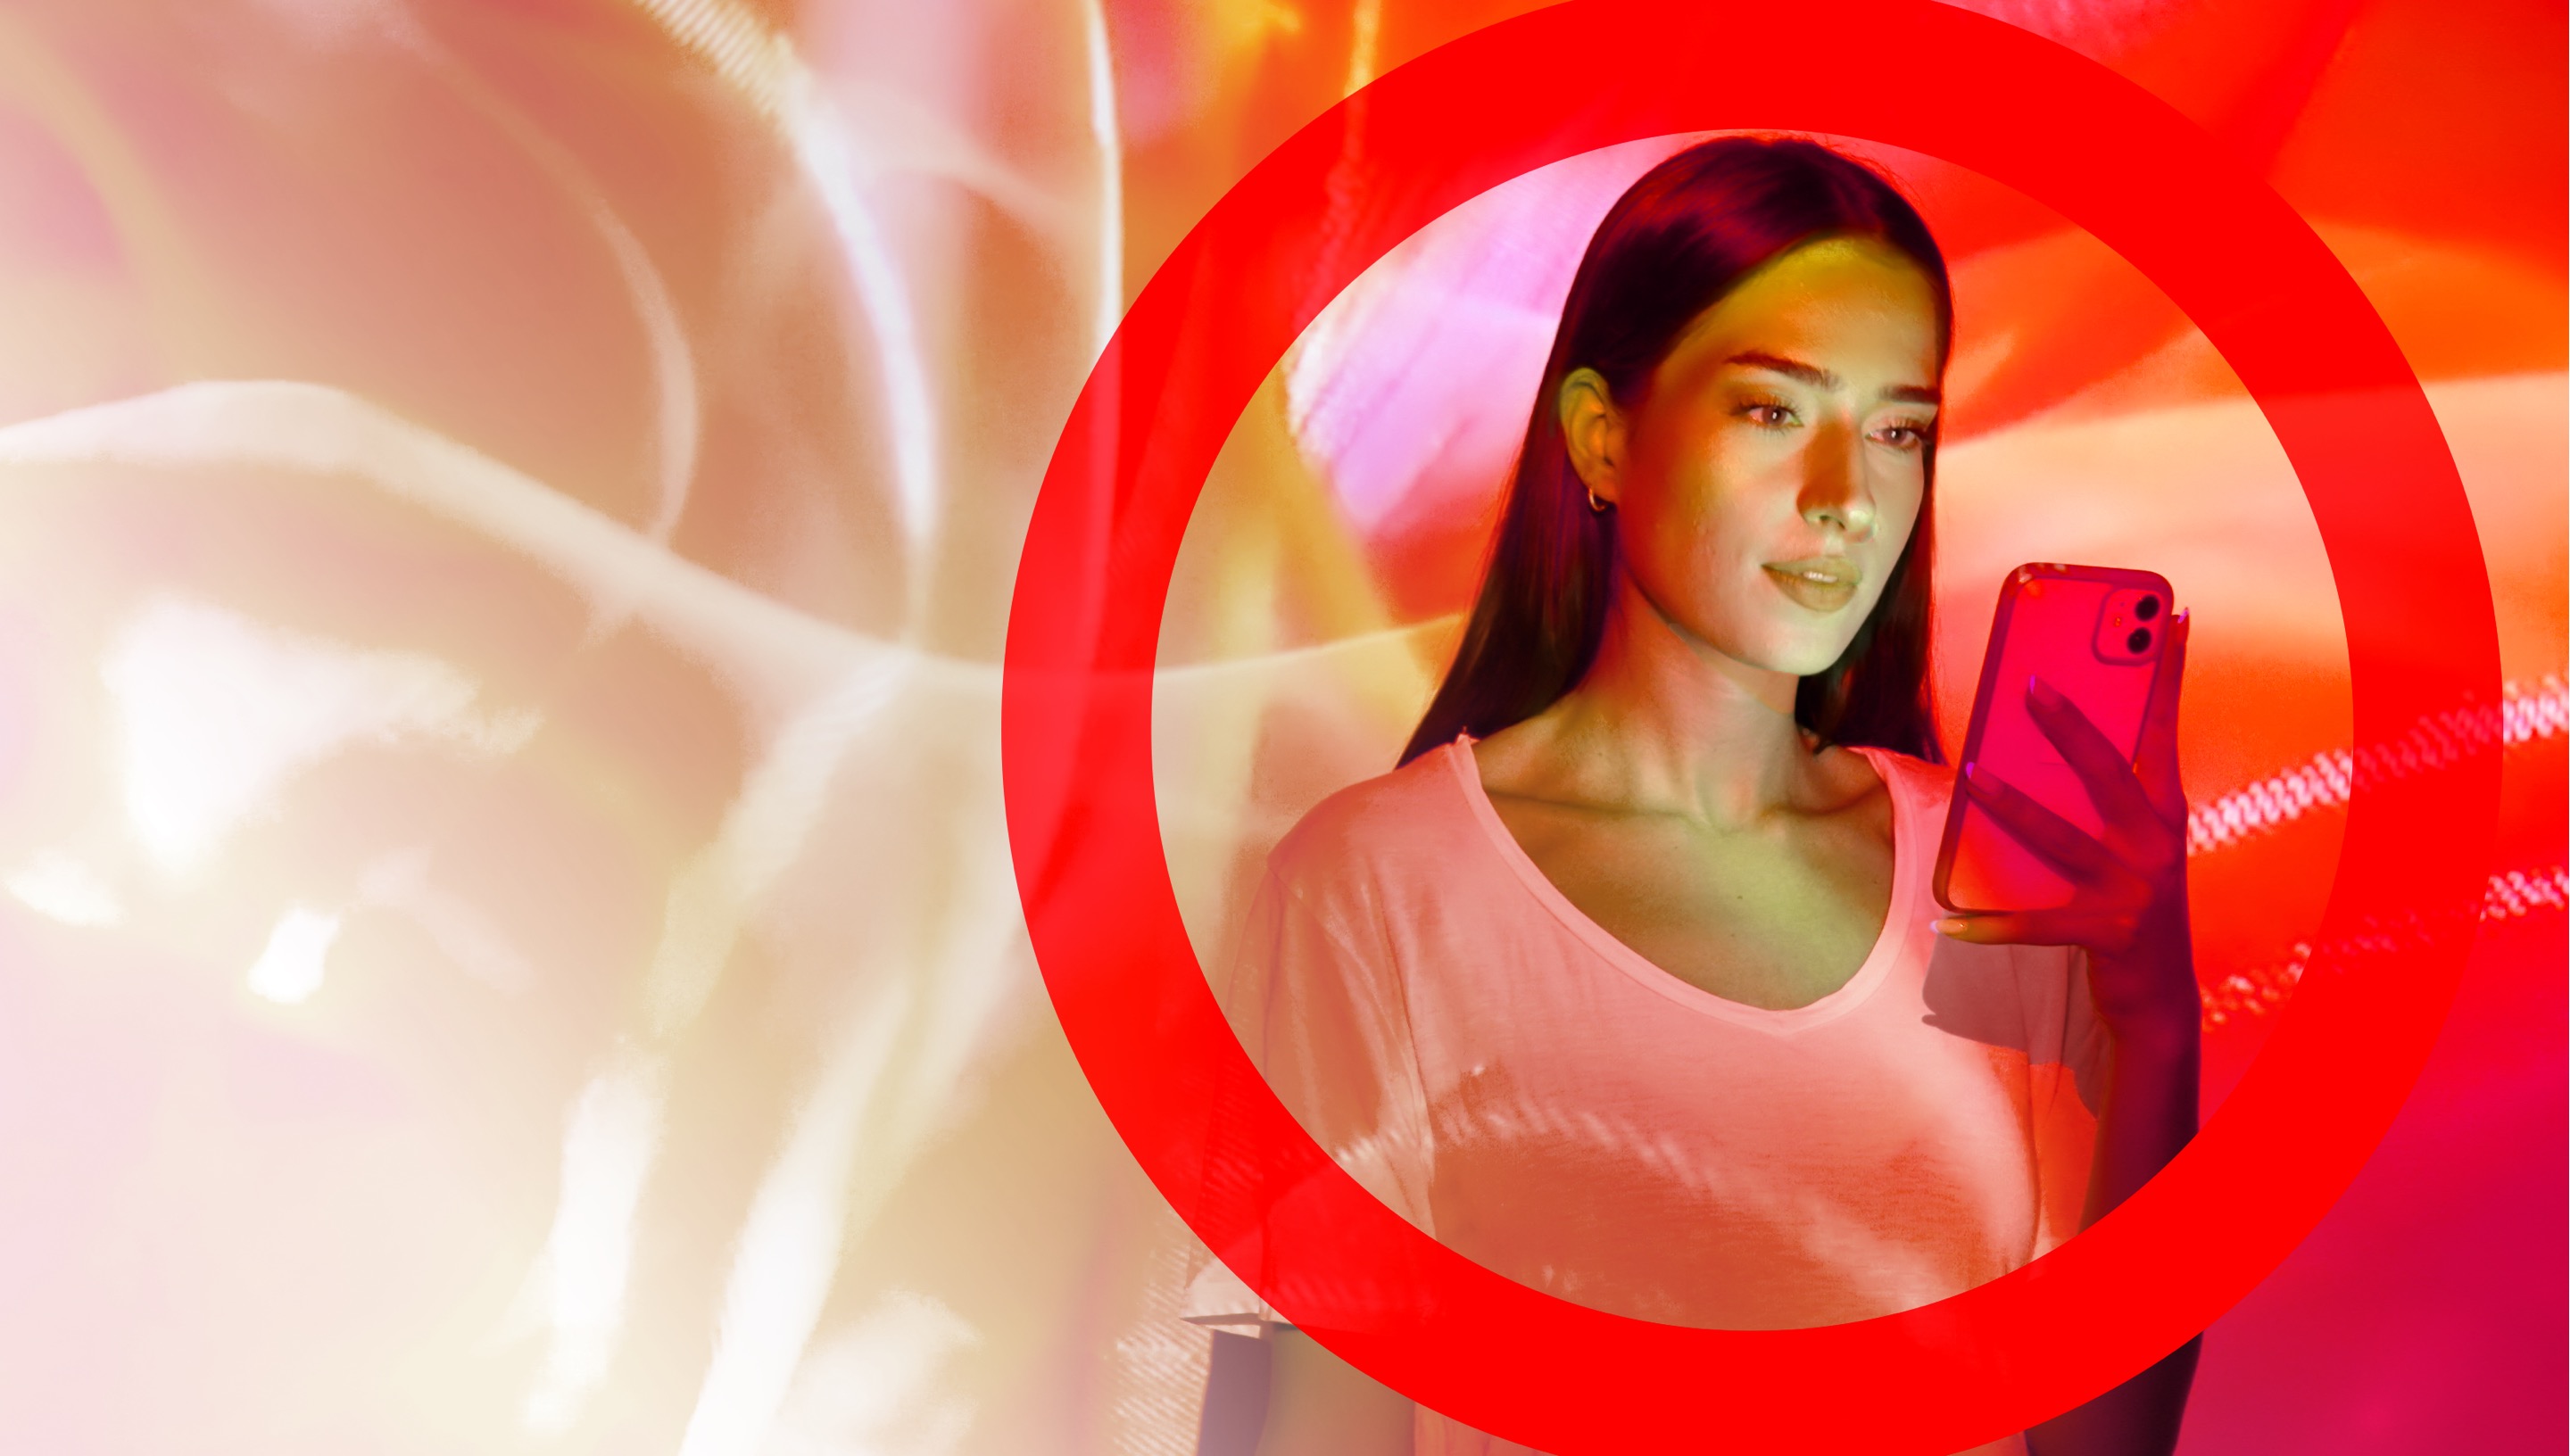 Woman checking her phone against a background of blurry shades of red and peach